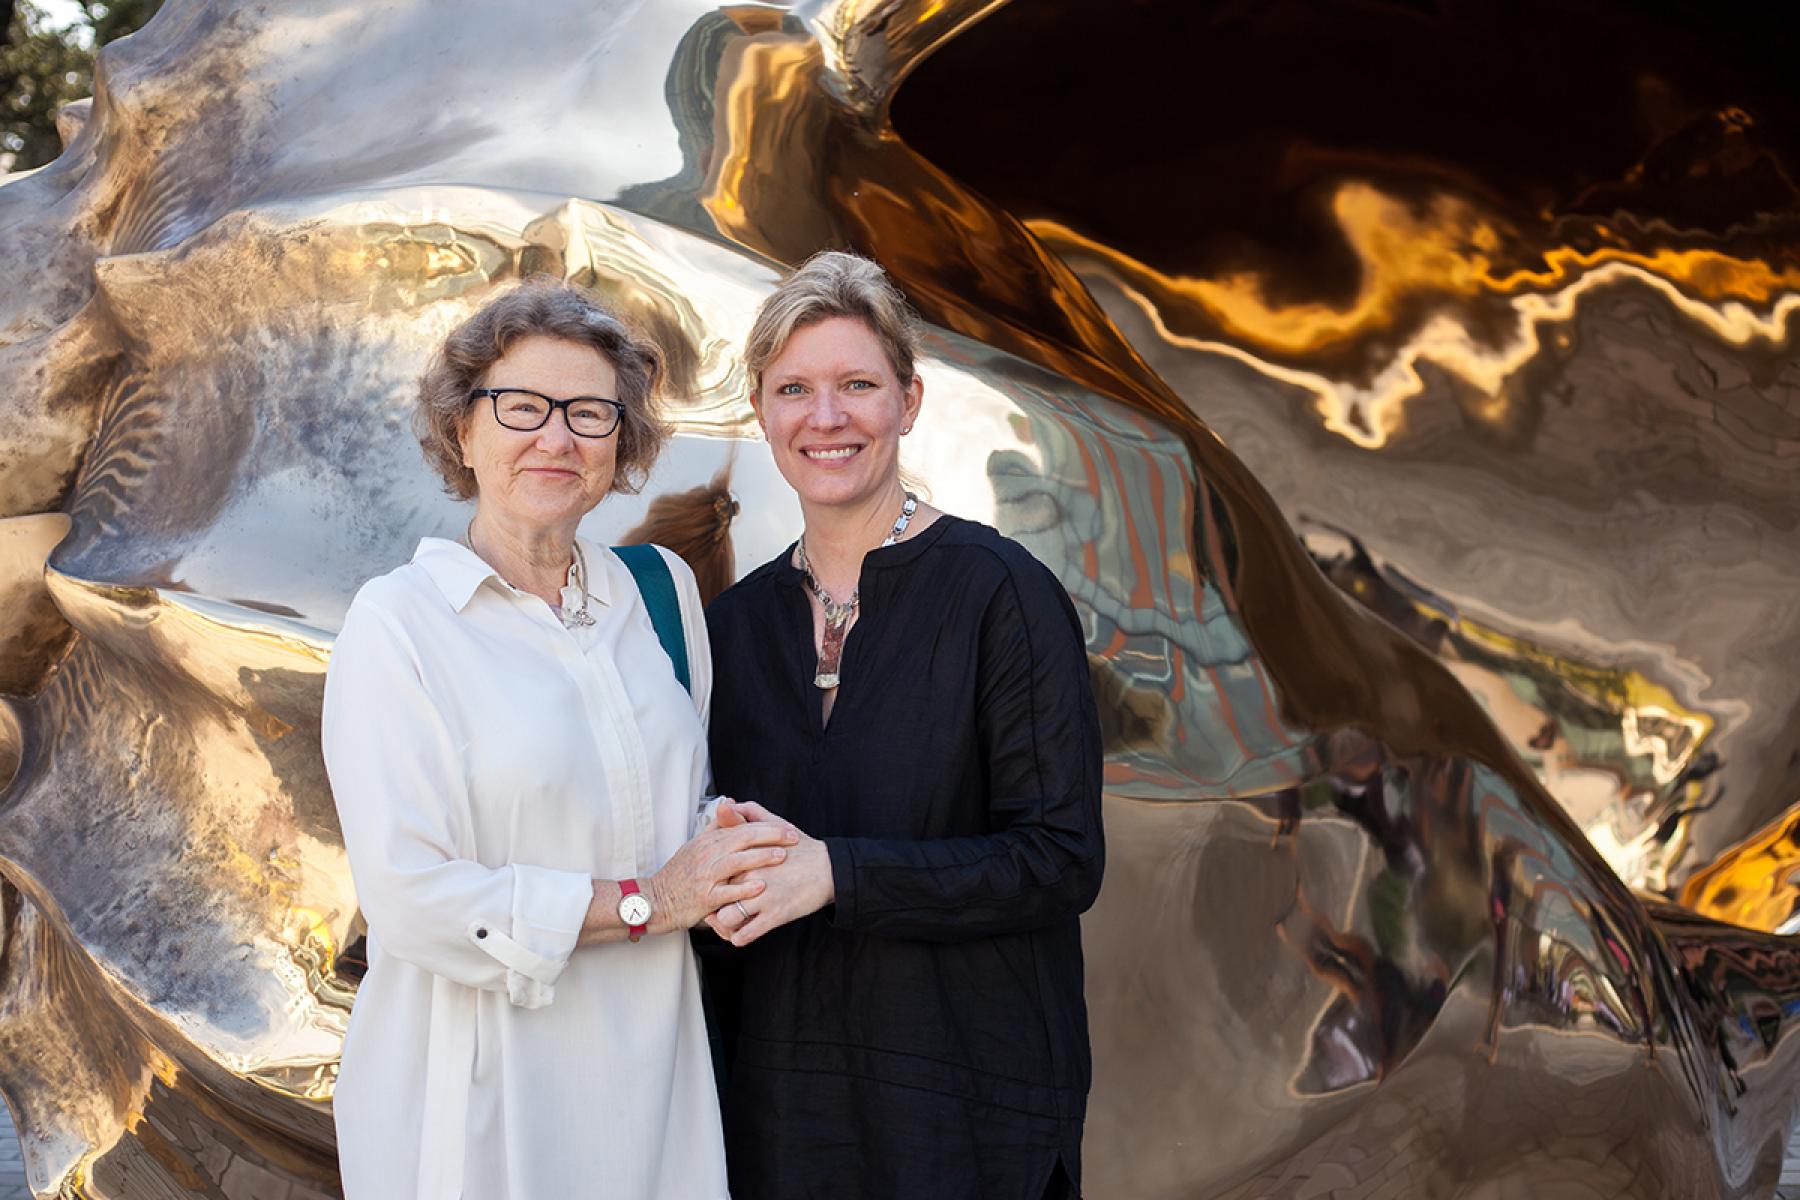 Two women stand in front of large shell (Marc Quinn's, "Spiral of the Galaxy") which appears golden.